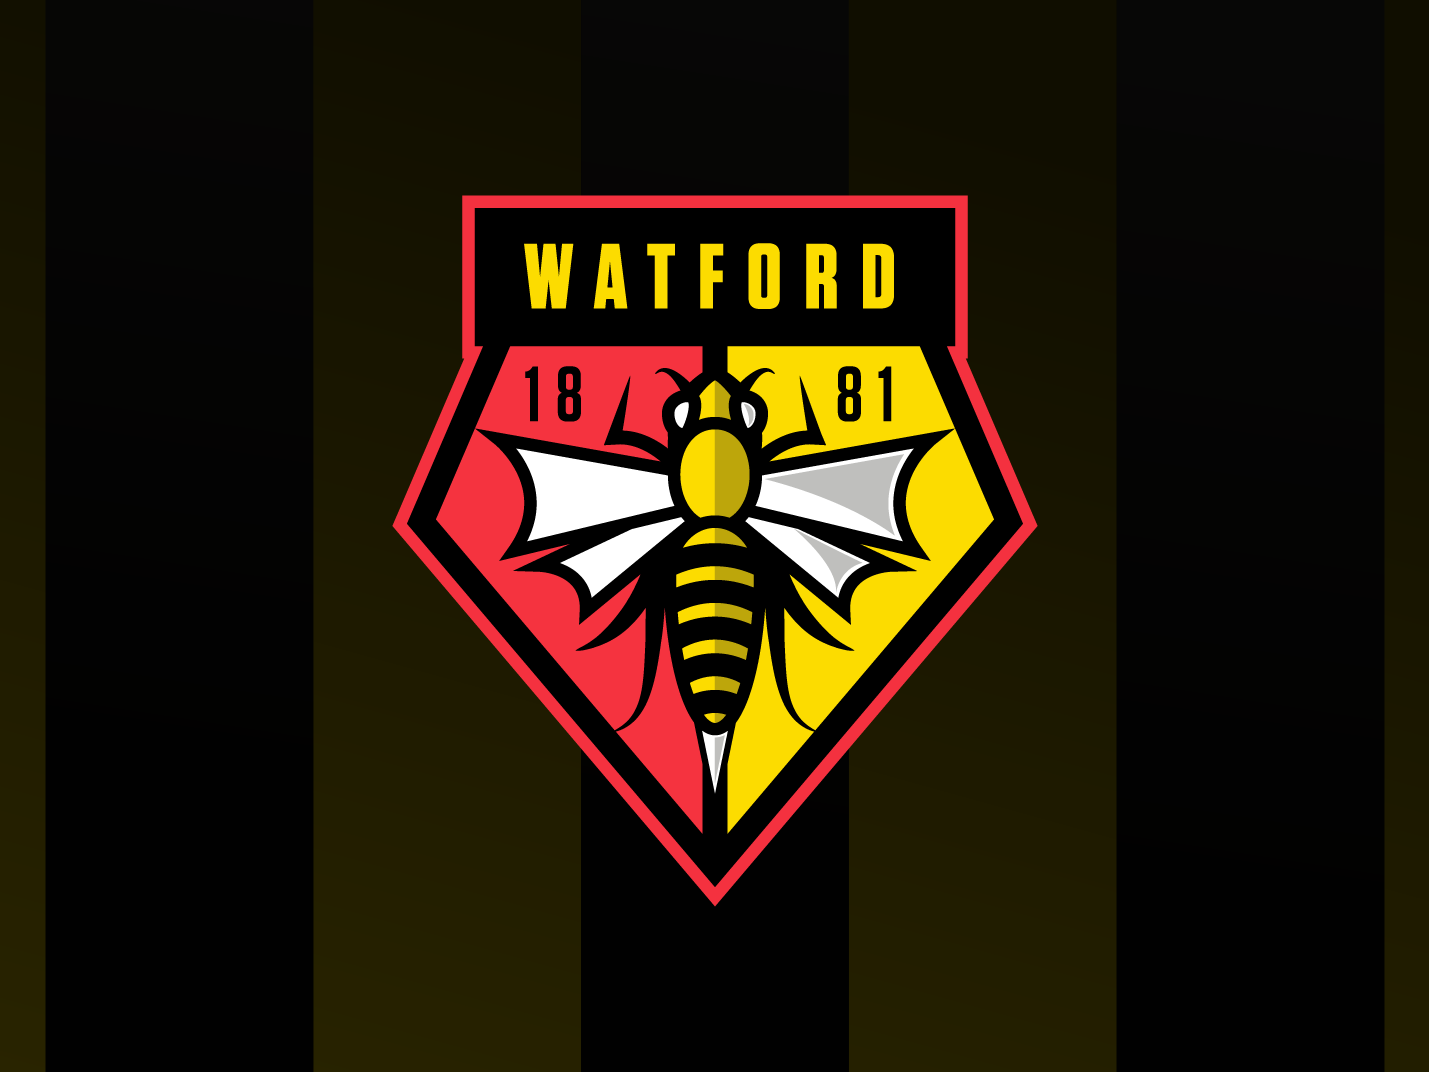 Watford Football Club Crest Redesign Concept by Steve Sinyard on Dribbble